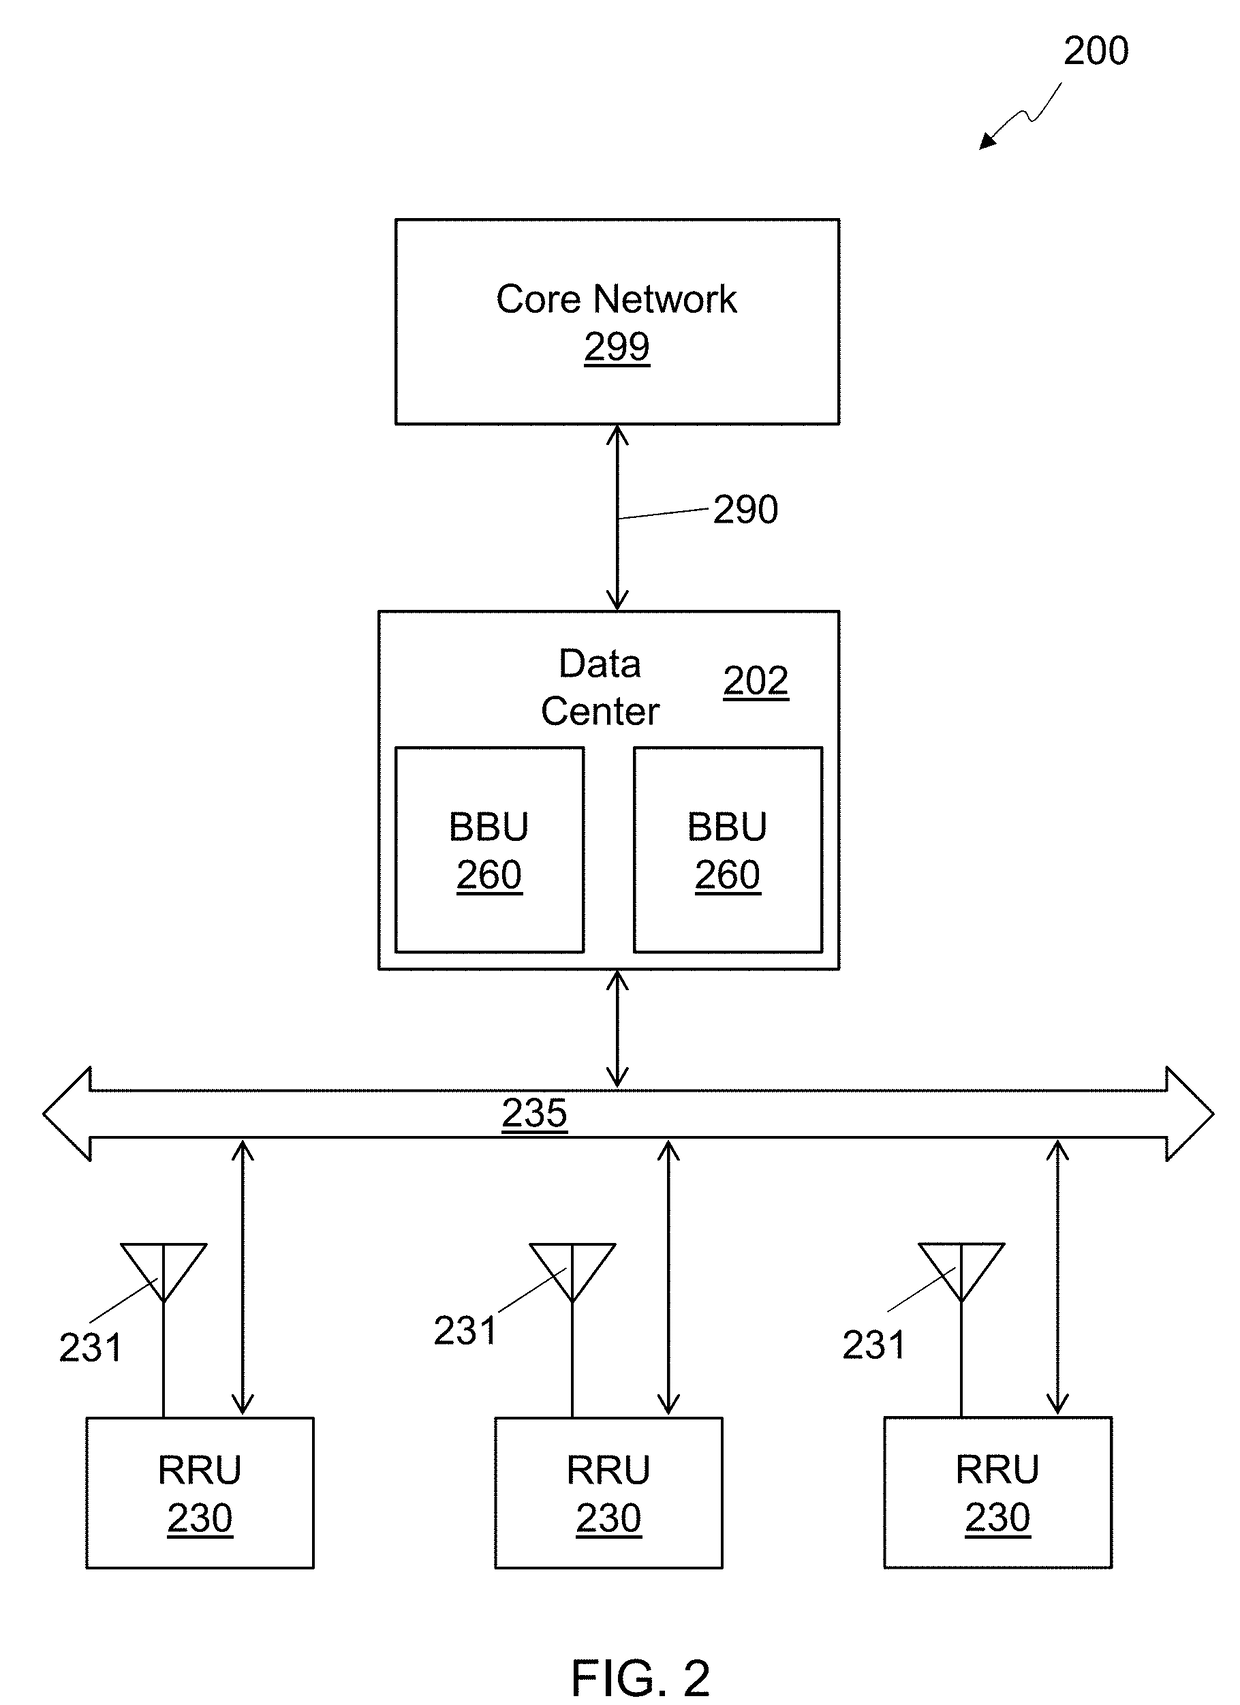 Remote Radio Unit with Adaptive Fronthaul Link for a Distributed Radio Access Network